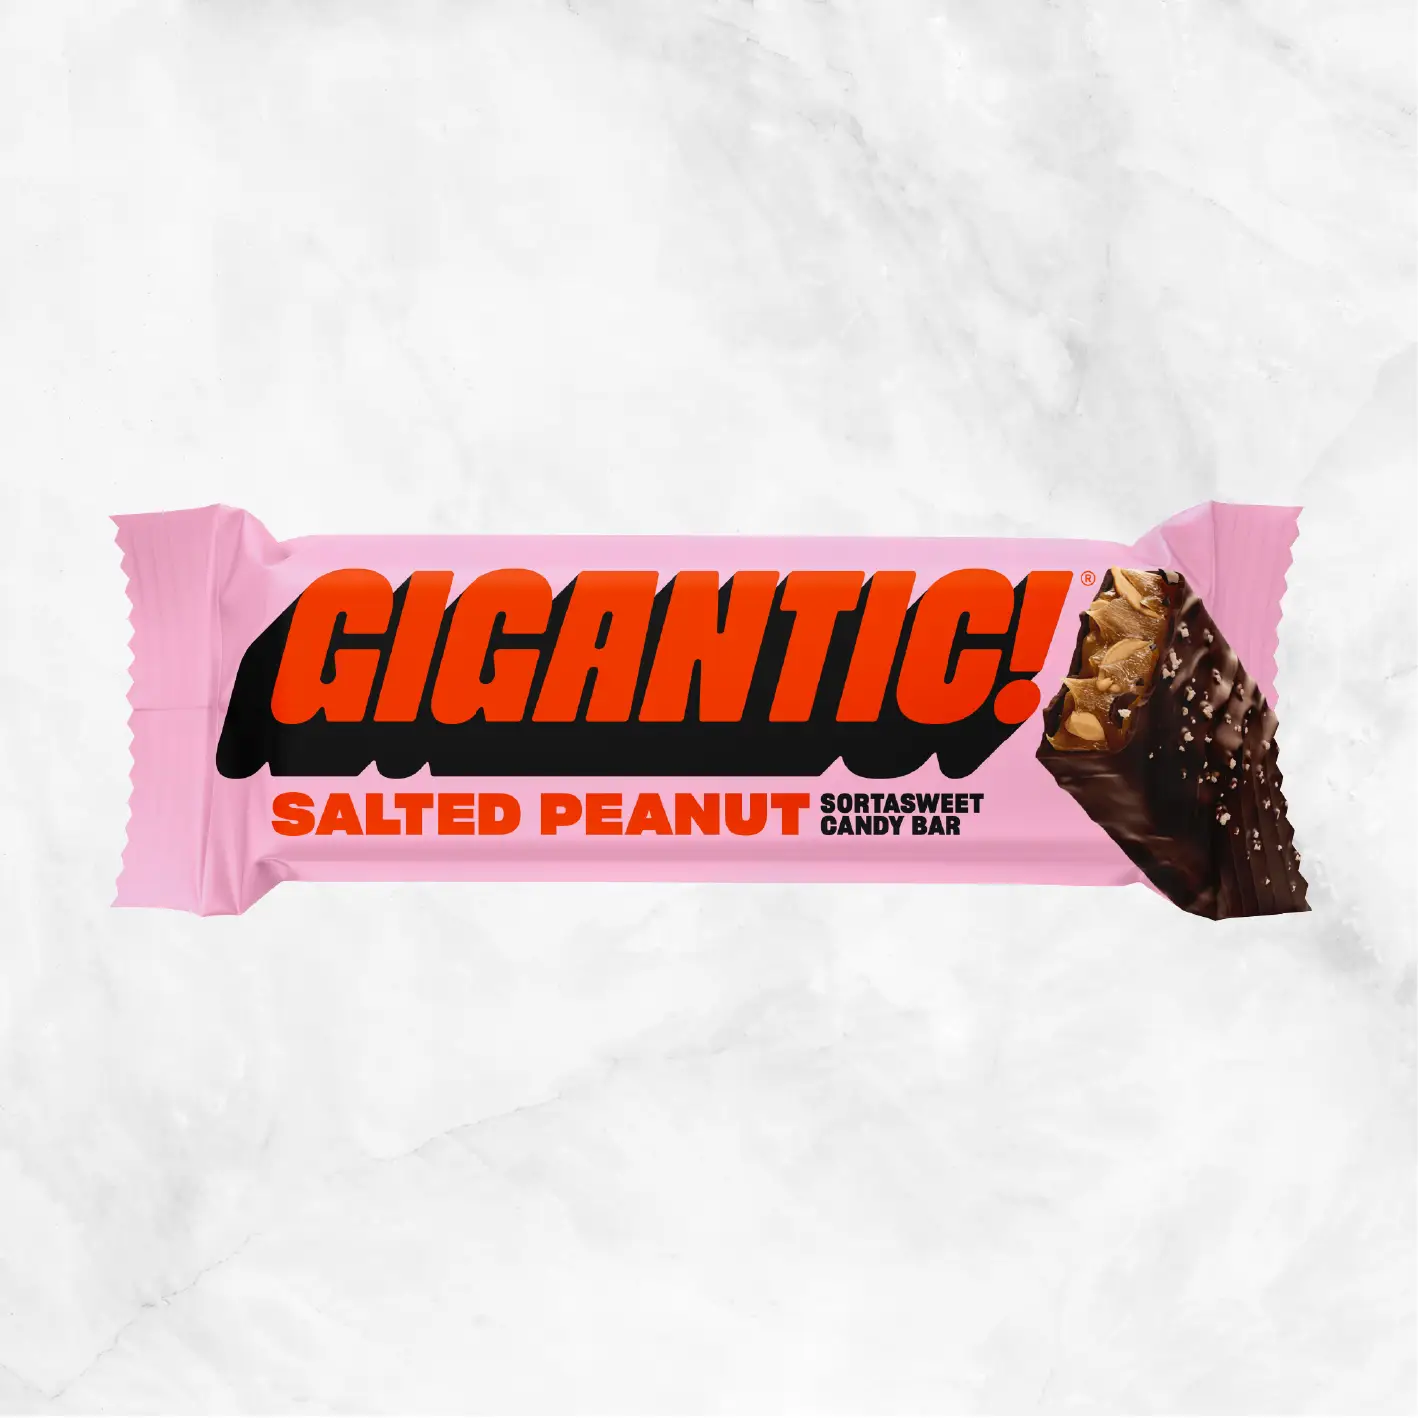 Salted Peanut Sortasweet Candy Bar Delivery